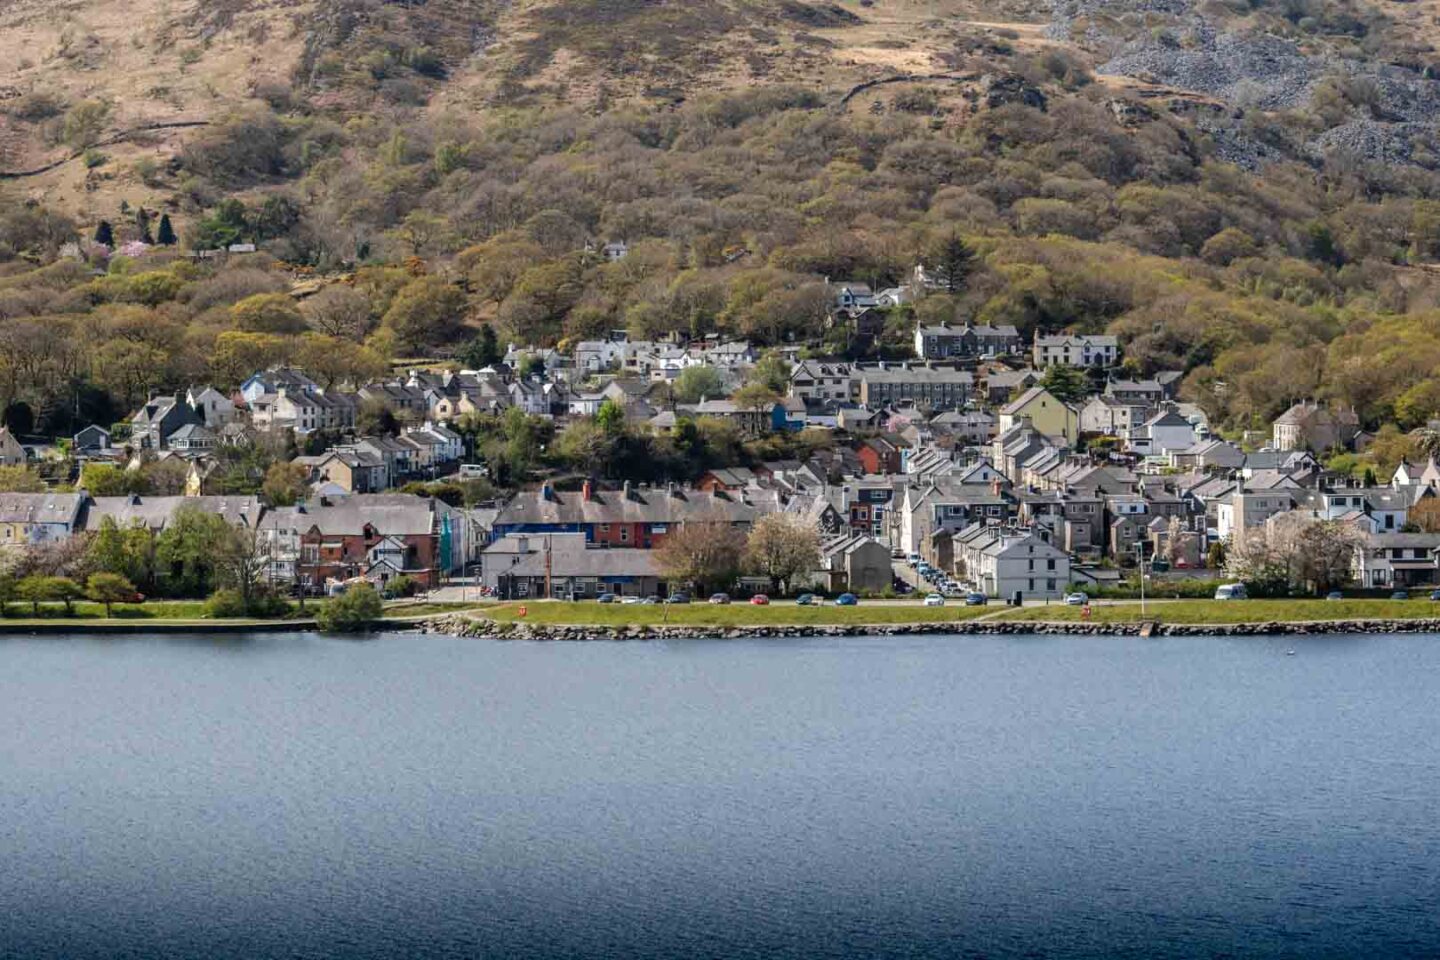 Llanberis town in North Wales